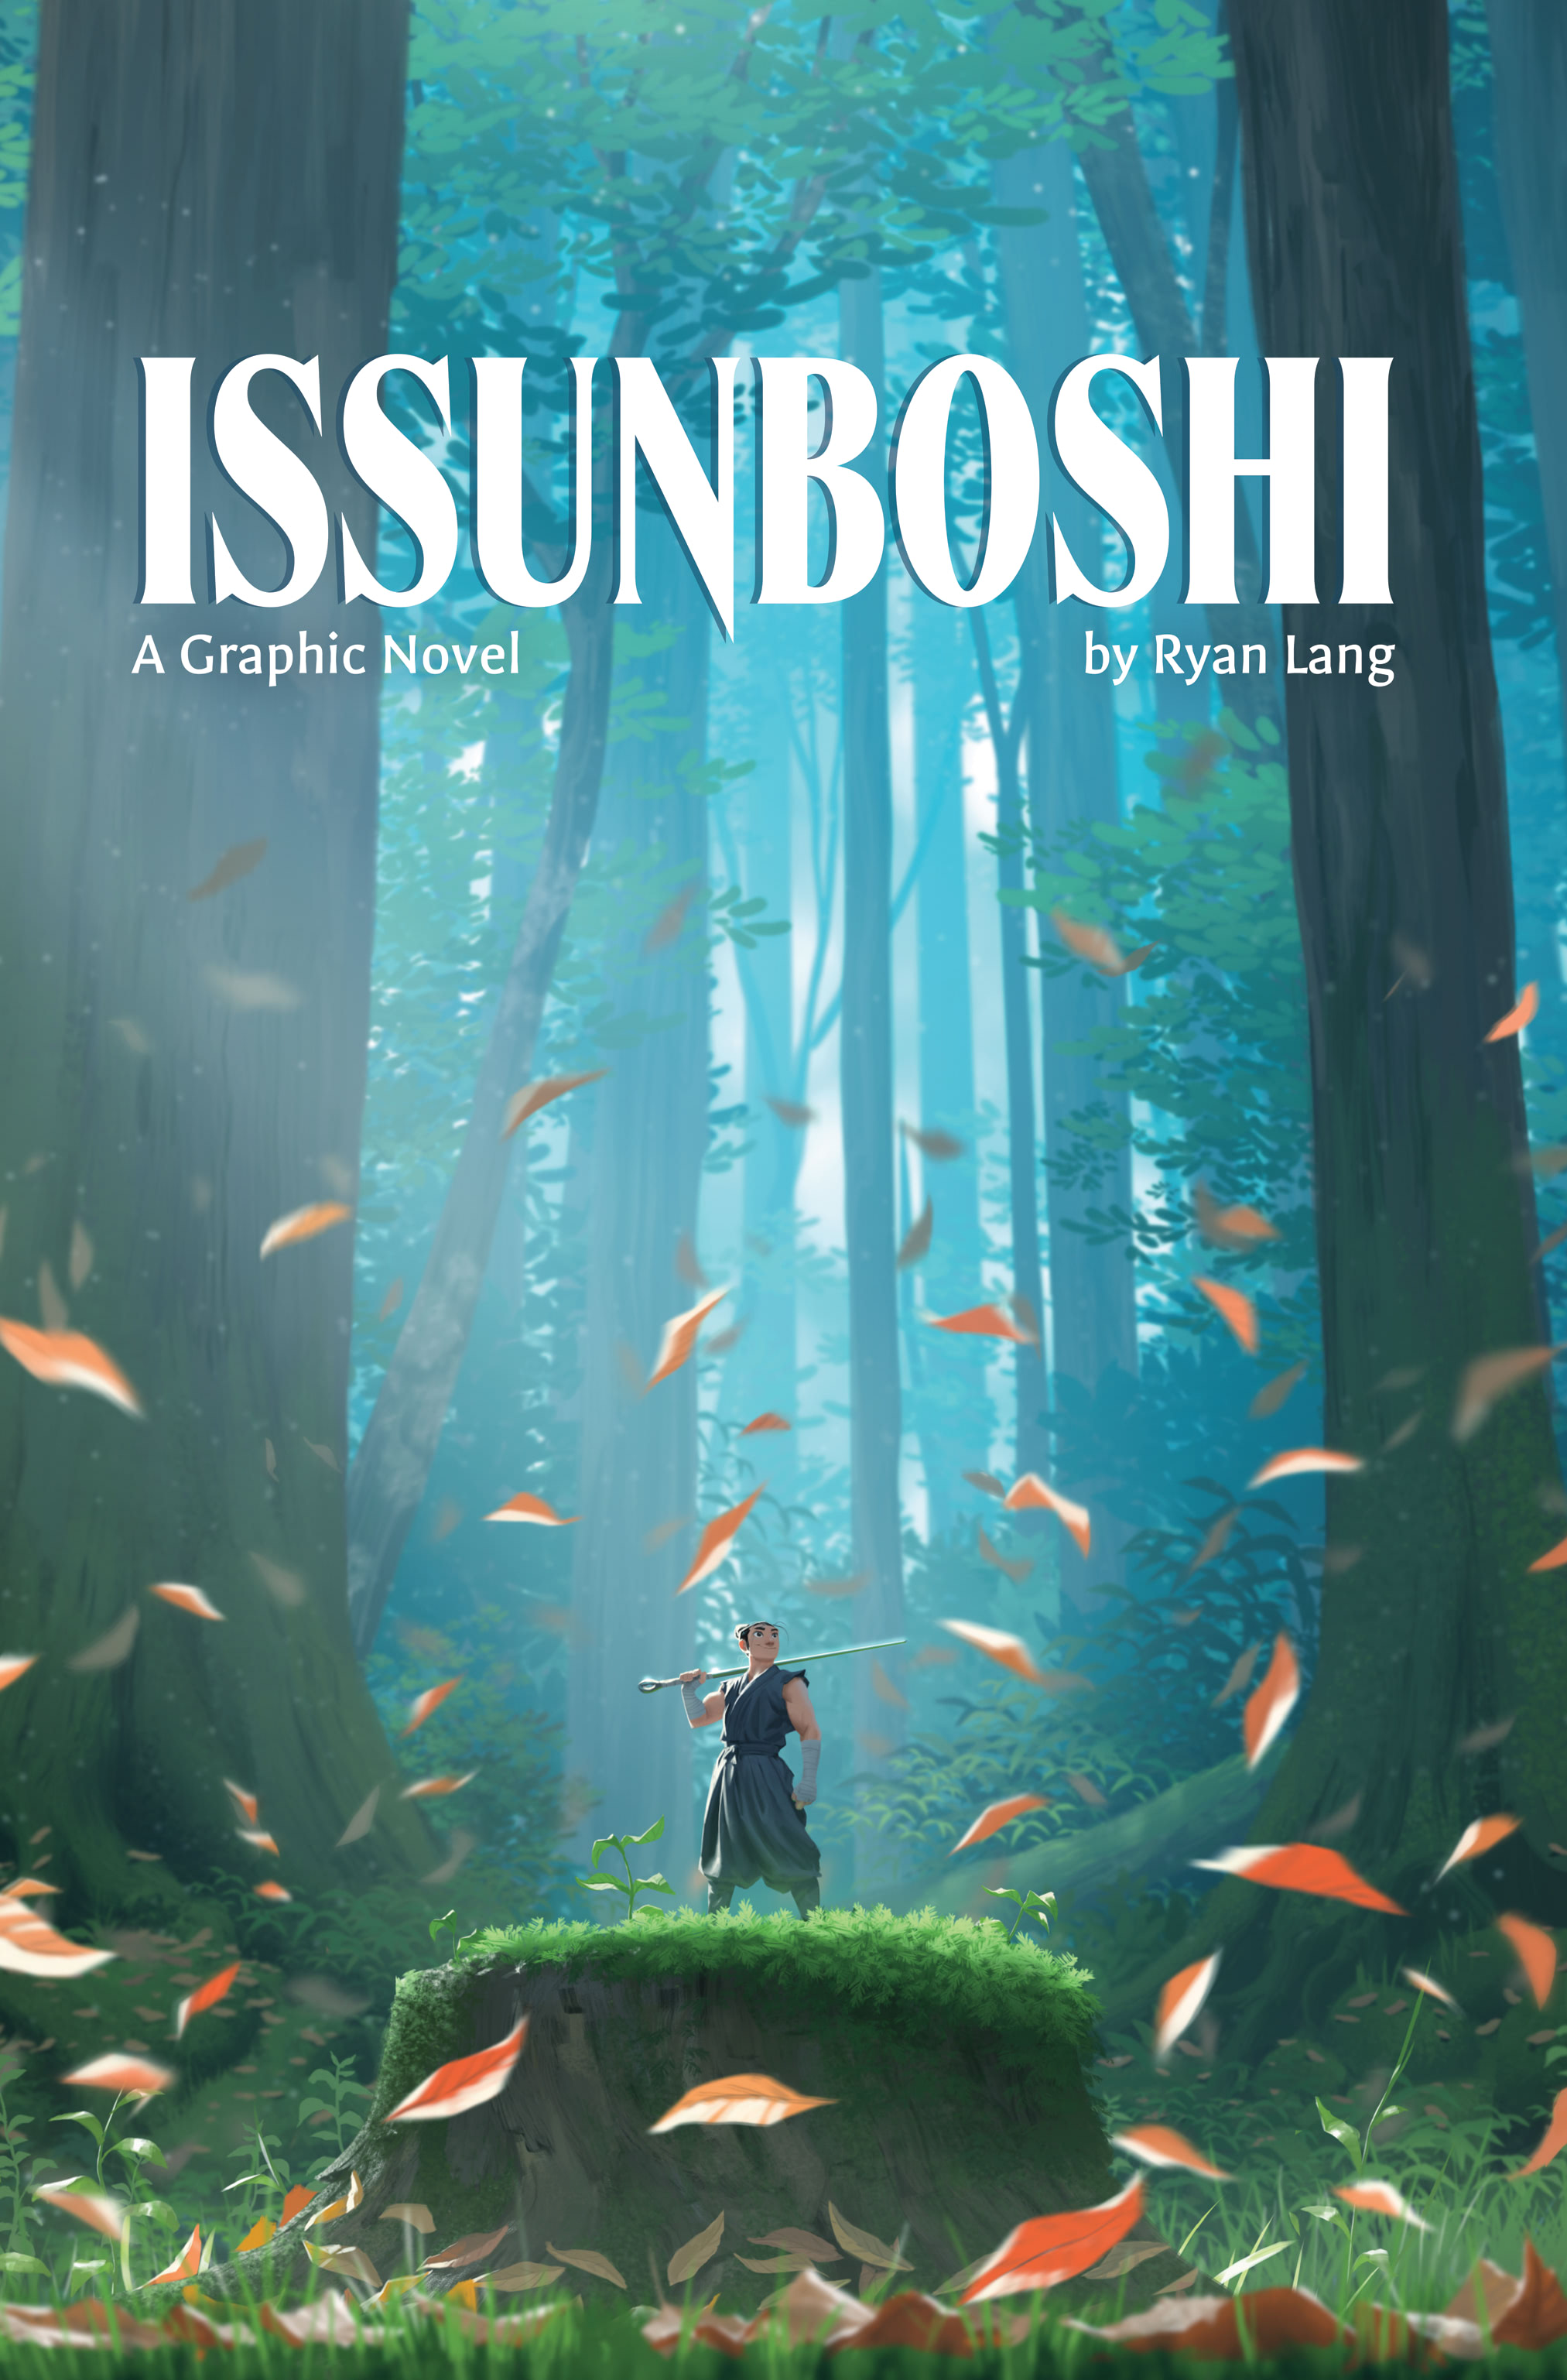 Read online Issunboshi: A Graphic Novel comic -  Issue # TPB (Part 1) - 1